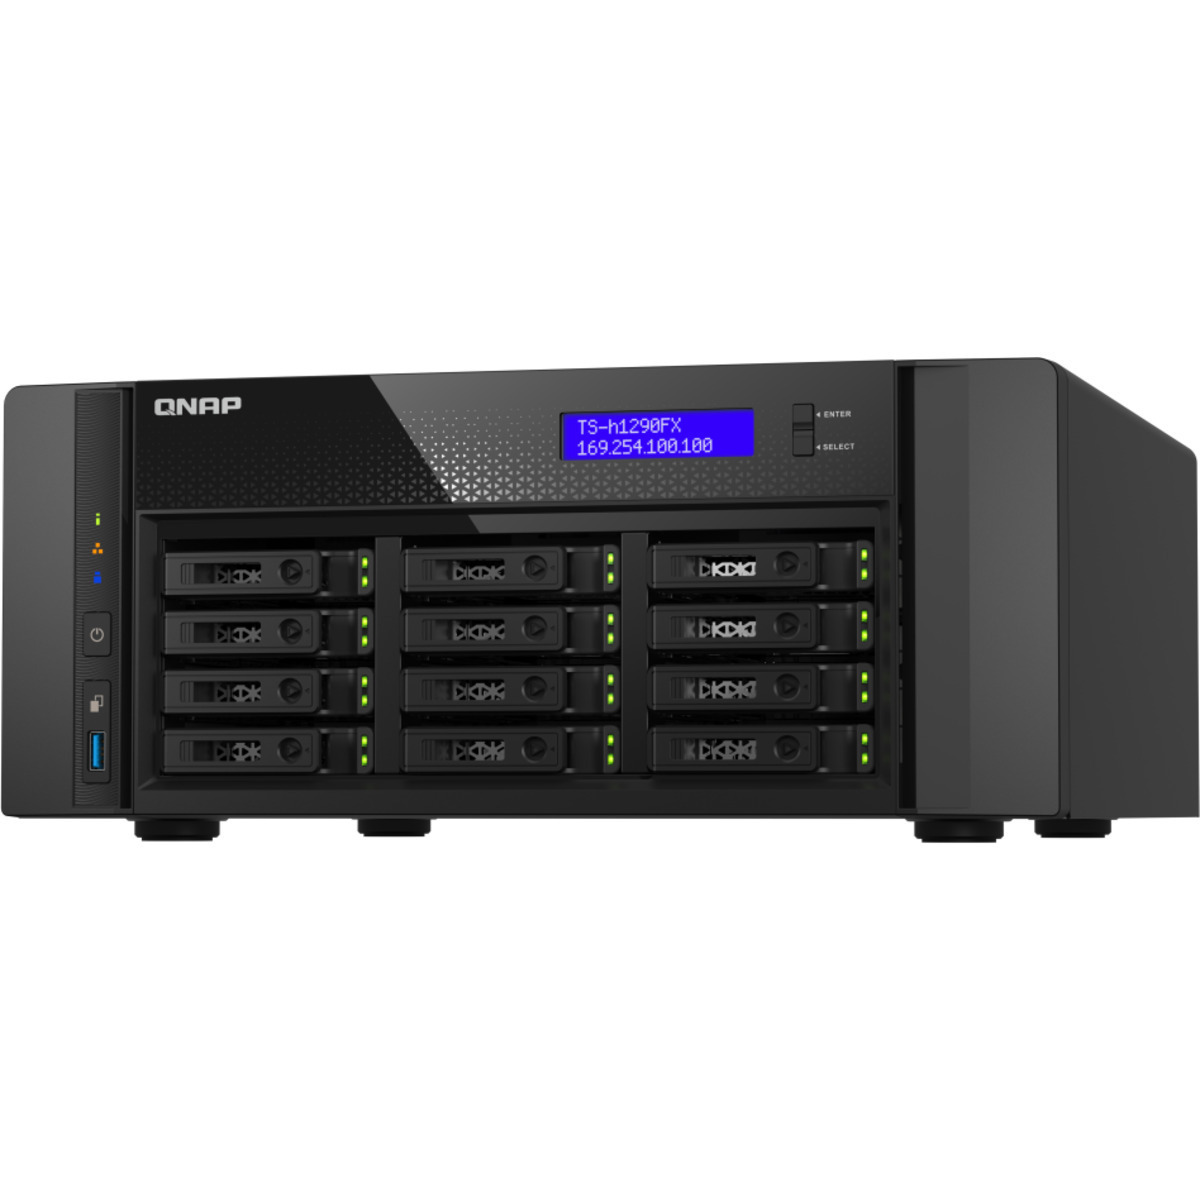 buy $9030 QNAP TS-h1290FX QuTS 7232P hero Edition 24tb Desktop NAS - Network Attached Storage Device 12x2000gb Western Digital Red SA500 WDS200T1R0A 2.5 560/530MB/s SATA 6Gb/s SSD NAS Class Drives Installed - Burn-In Tested - nas headquarters buy network attached storage server device das new raid-5 free shipping usa TS-h1290FX QuTS 7232P hero Edition